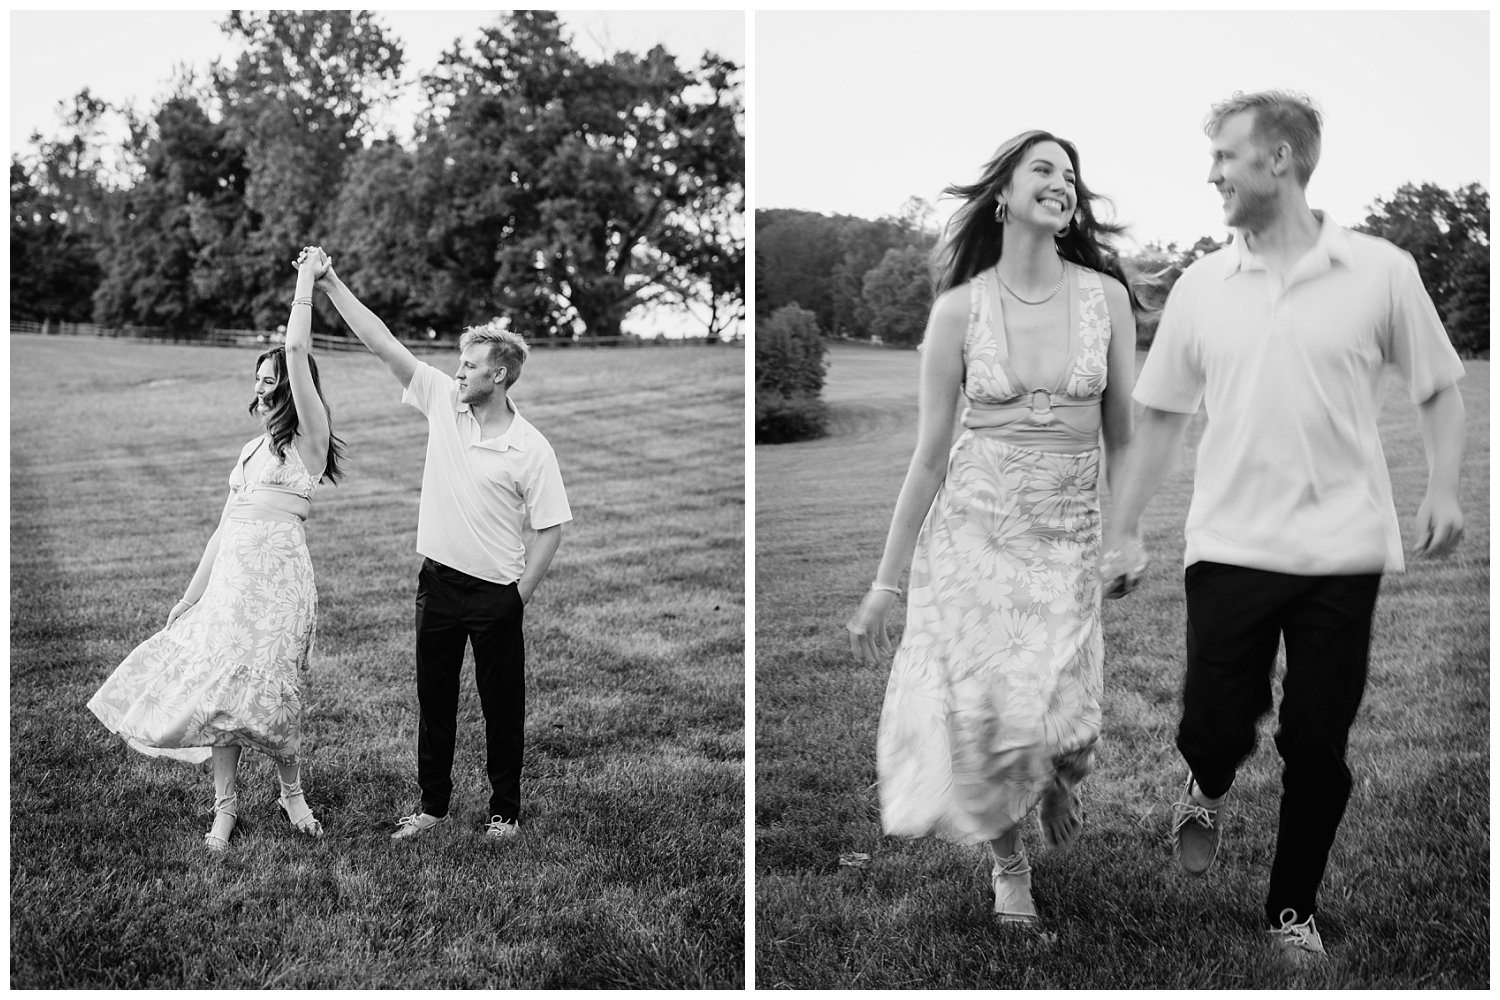 Engaged couple portraits at Oatlands Historic House in Leesburg, Virginia.